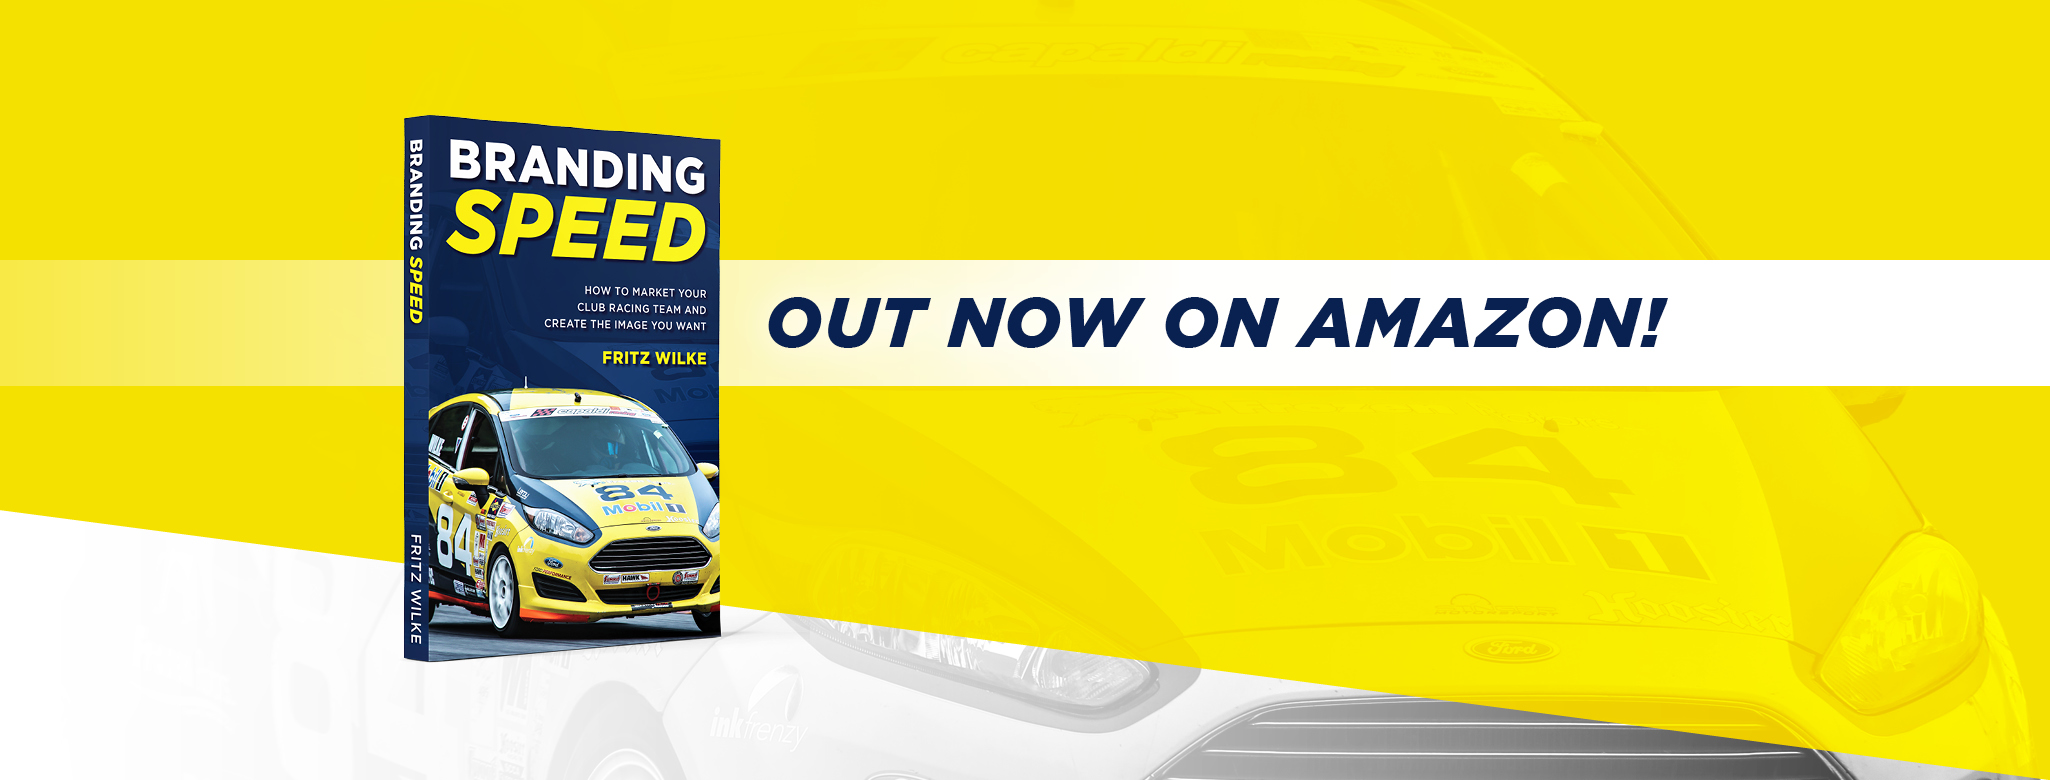 Branding Speed: How to Market Your Club Racing Team and Create the Image You Want
Marketing Book
Grassroots Motorsports Book
Out now on Amazon